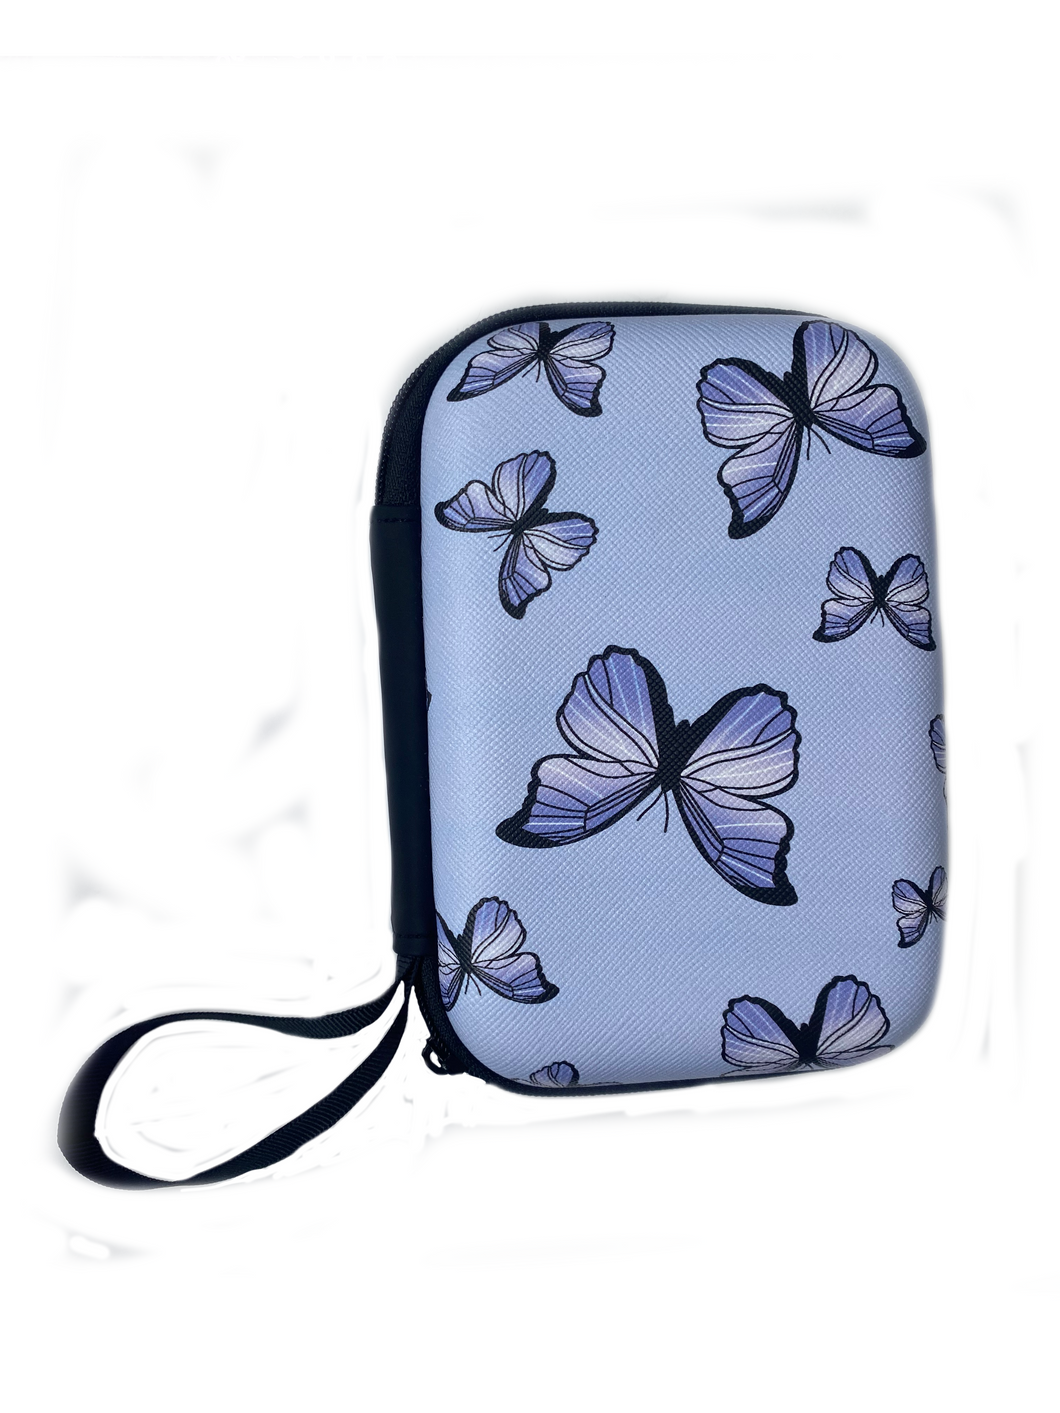 Butterfly Storage Container